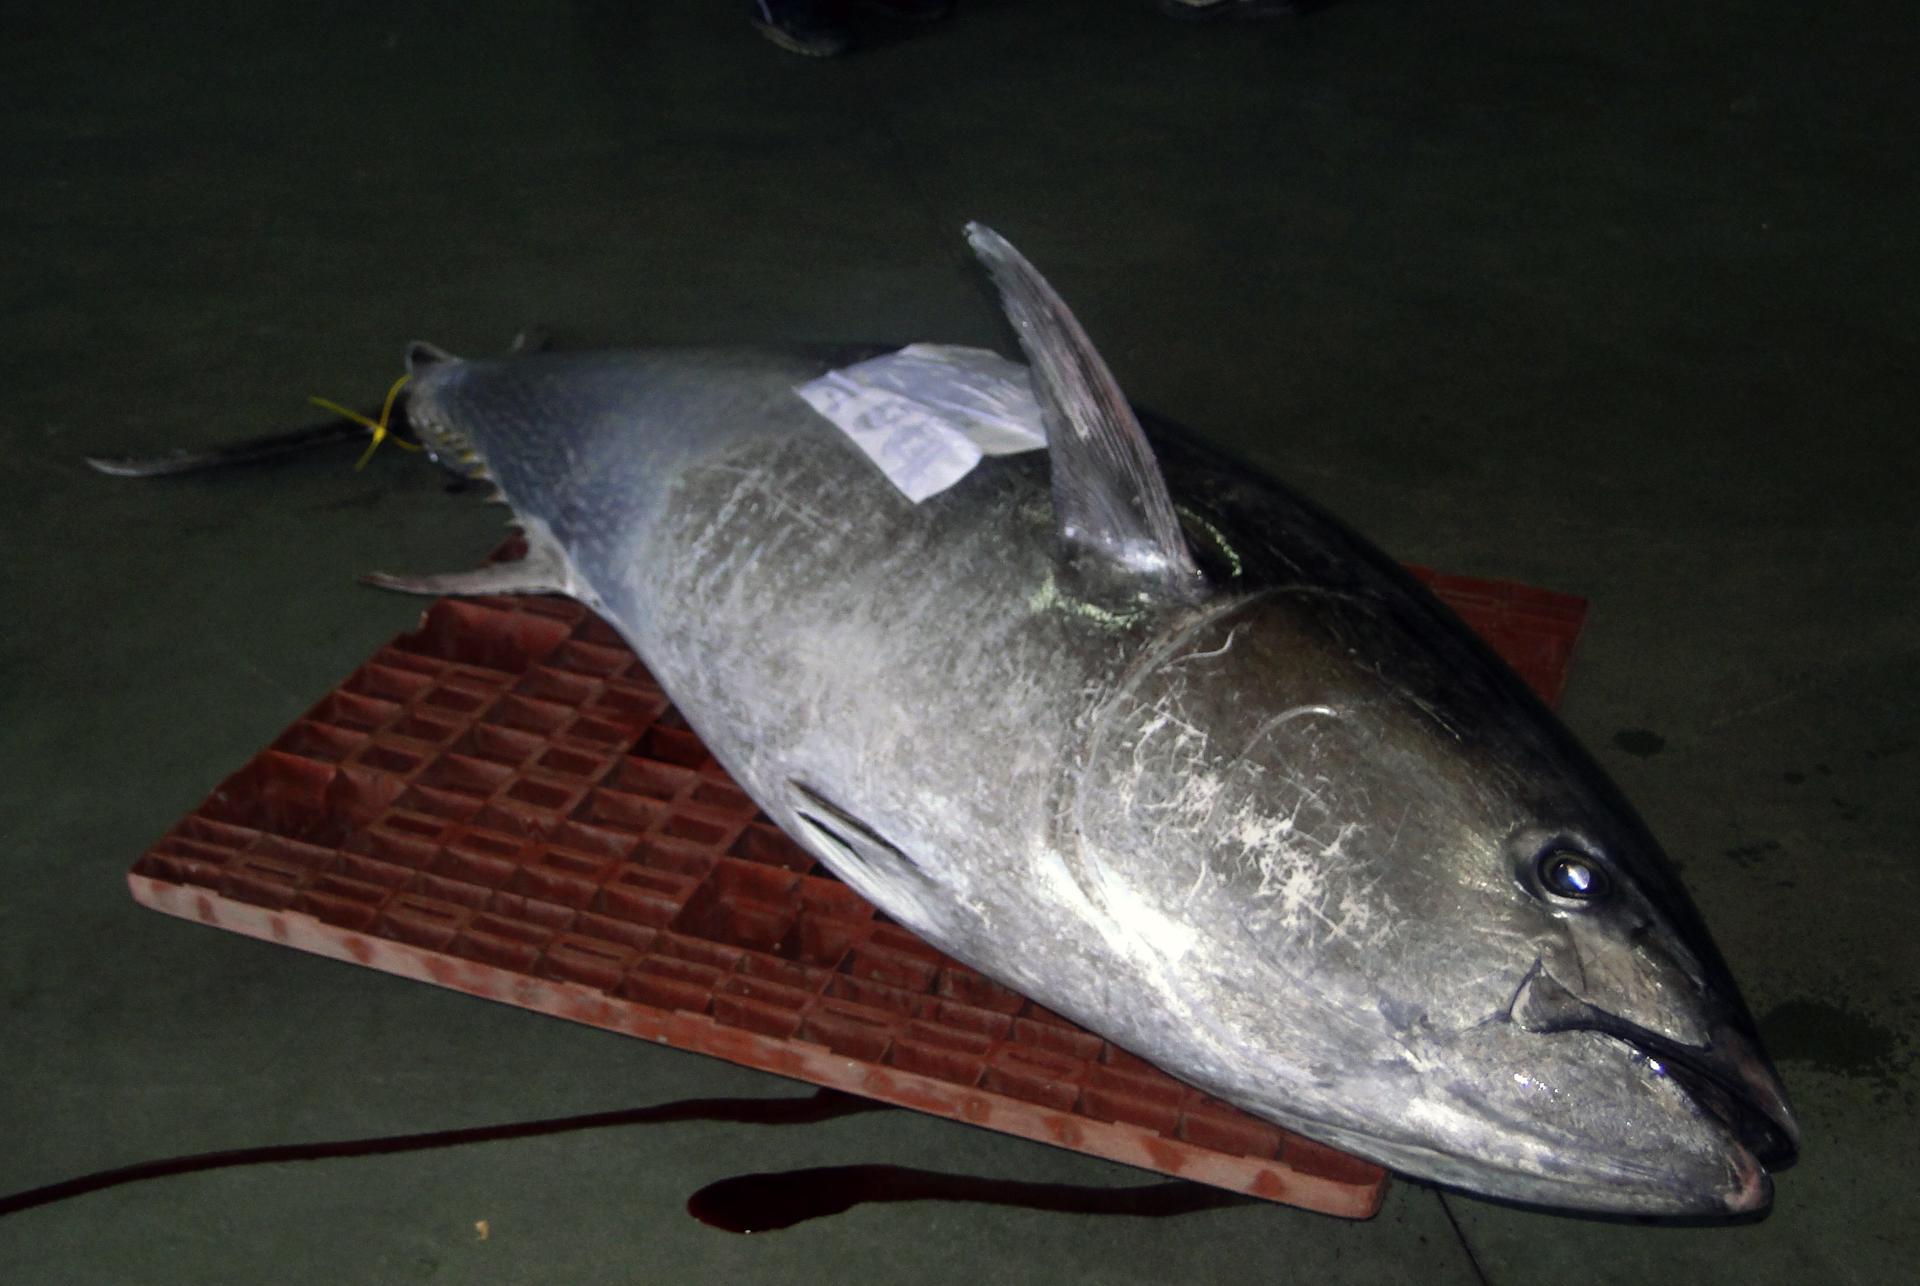 They study bluefin tuna in Barbate (Cádiz) and Mazarrón (Murcia) to improve the conservation of the species – EFE News